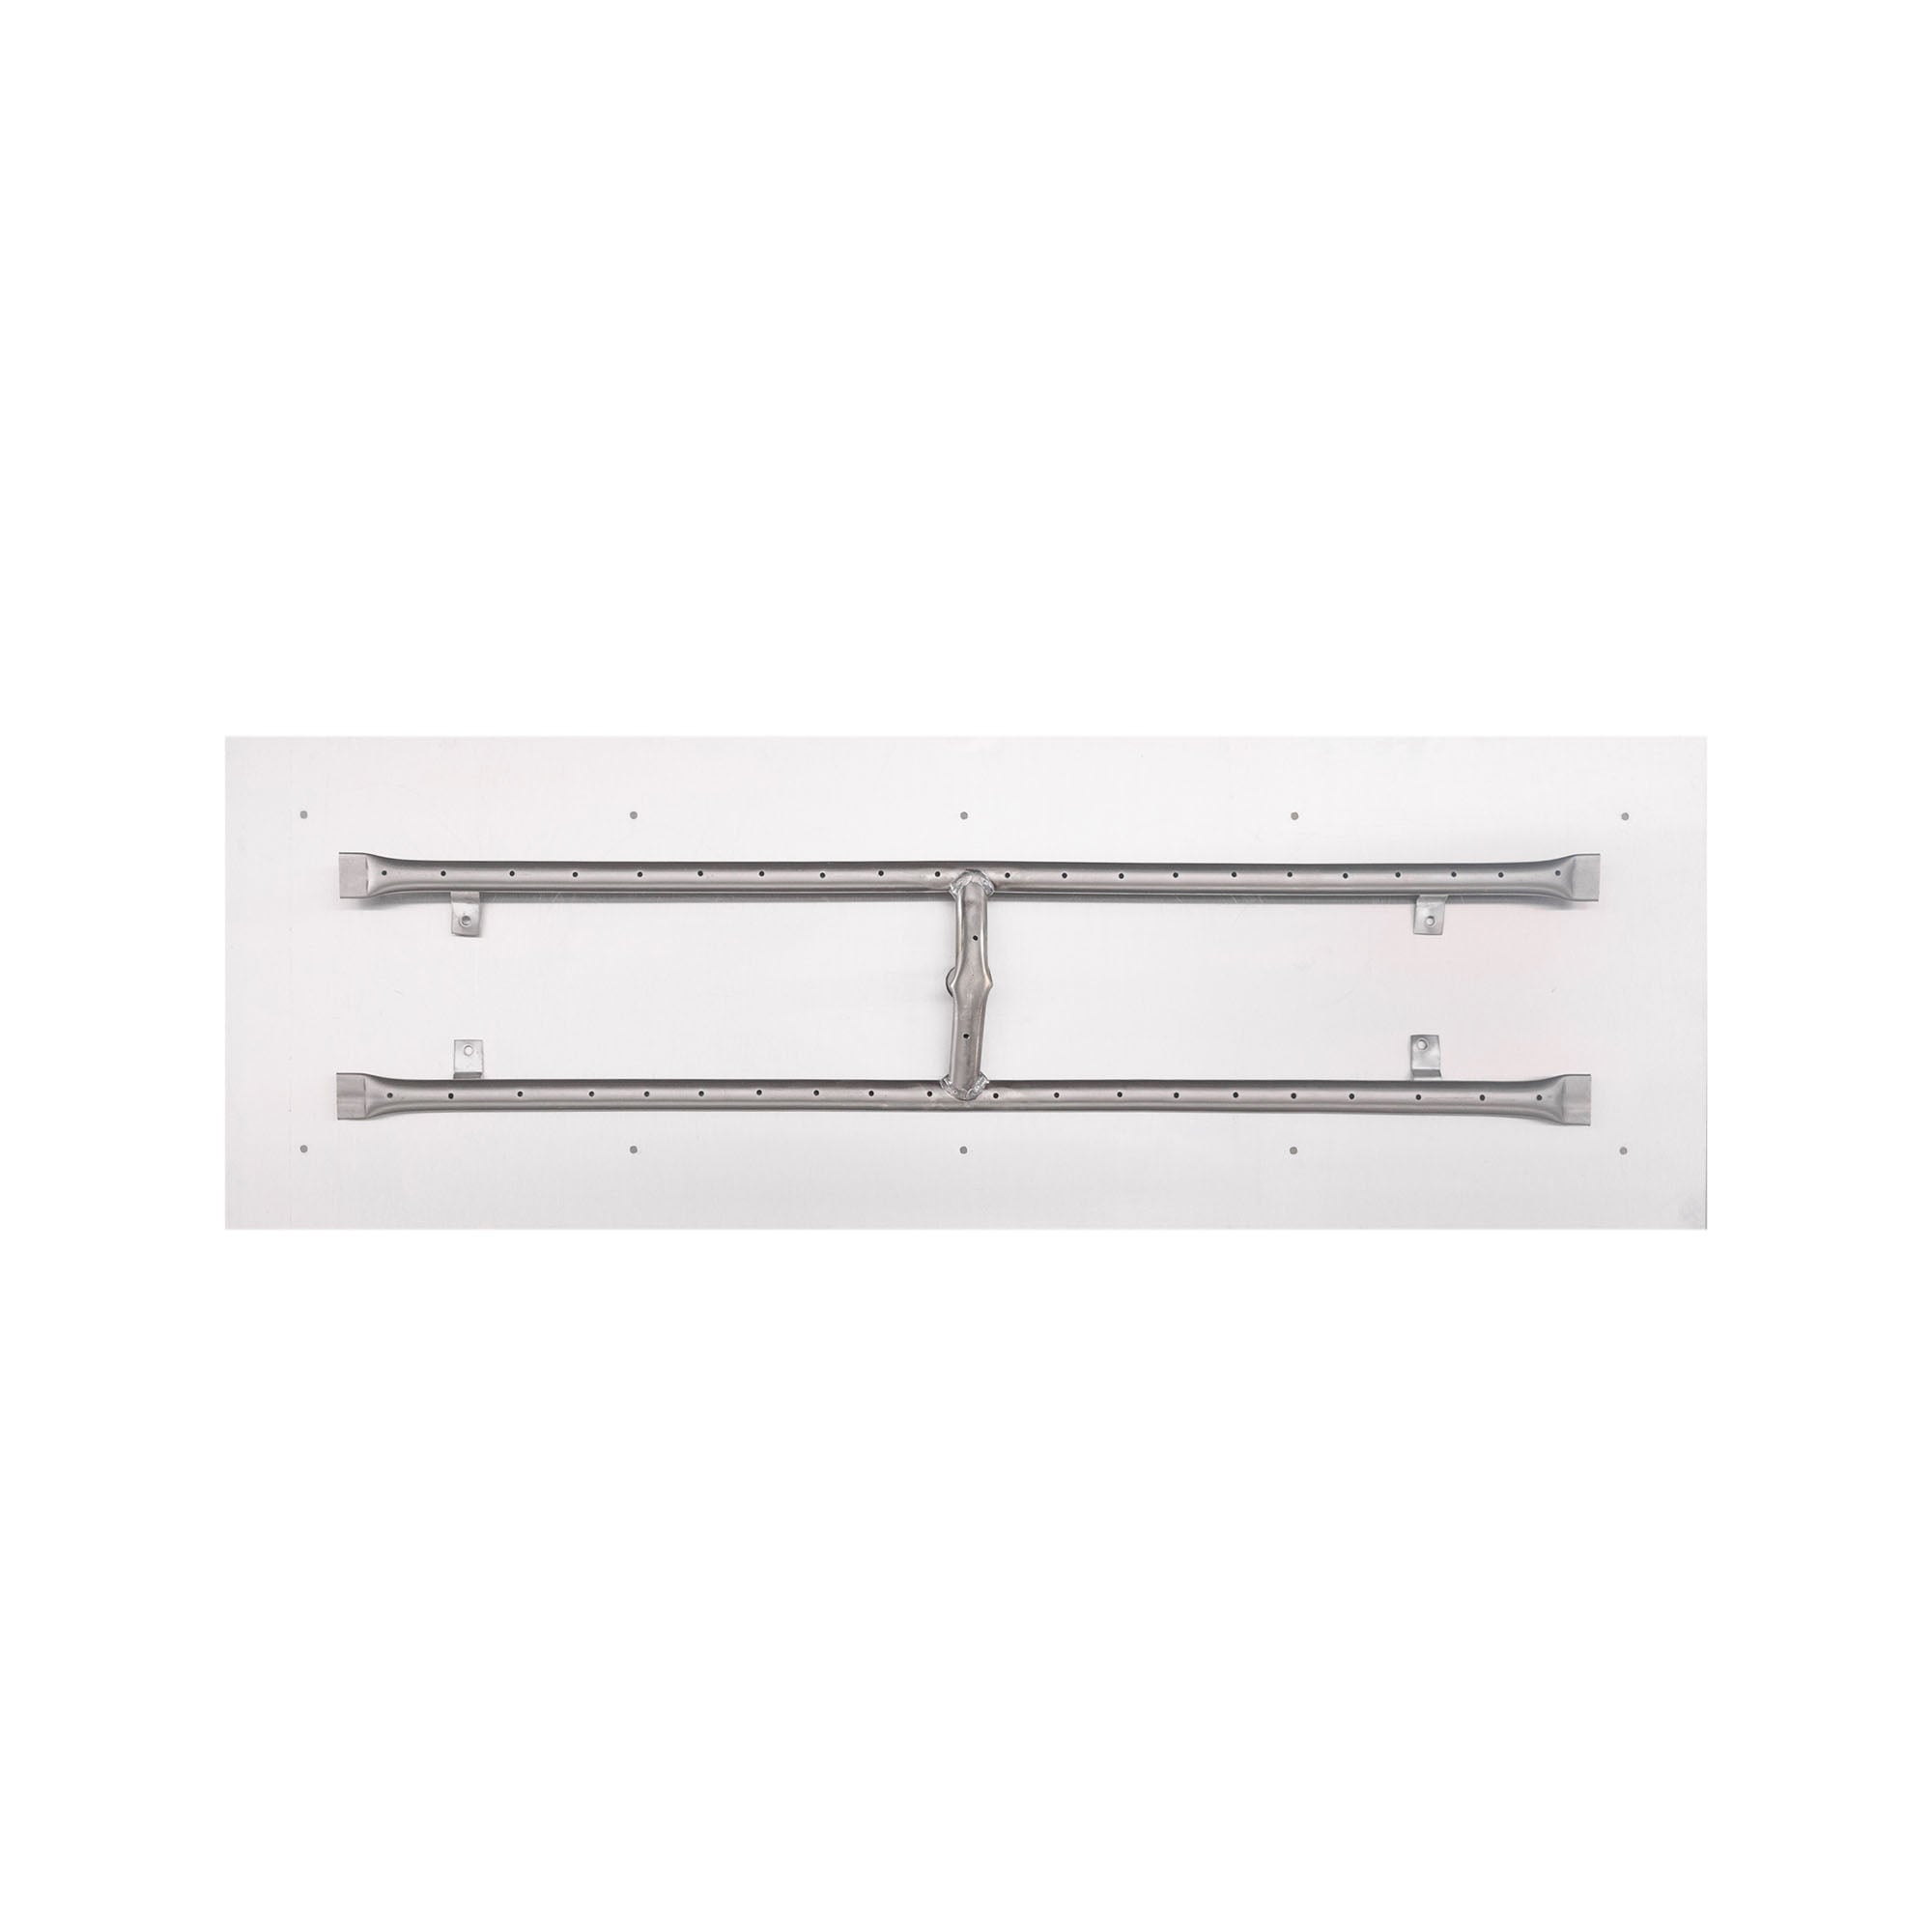 The Outdoor Plus - 72 Inch Rectangle Stainless Steel Pan and 60 Inch H-Burner - OPT-REFD1872